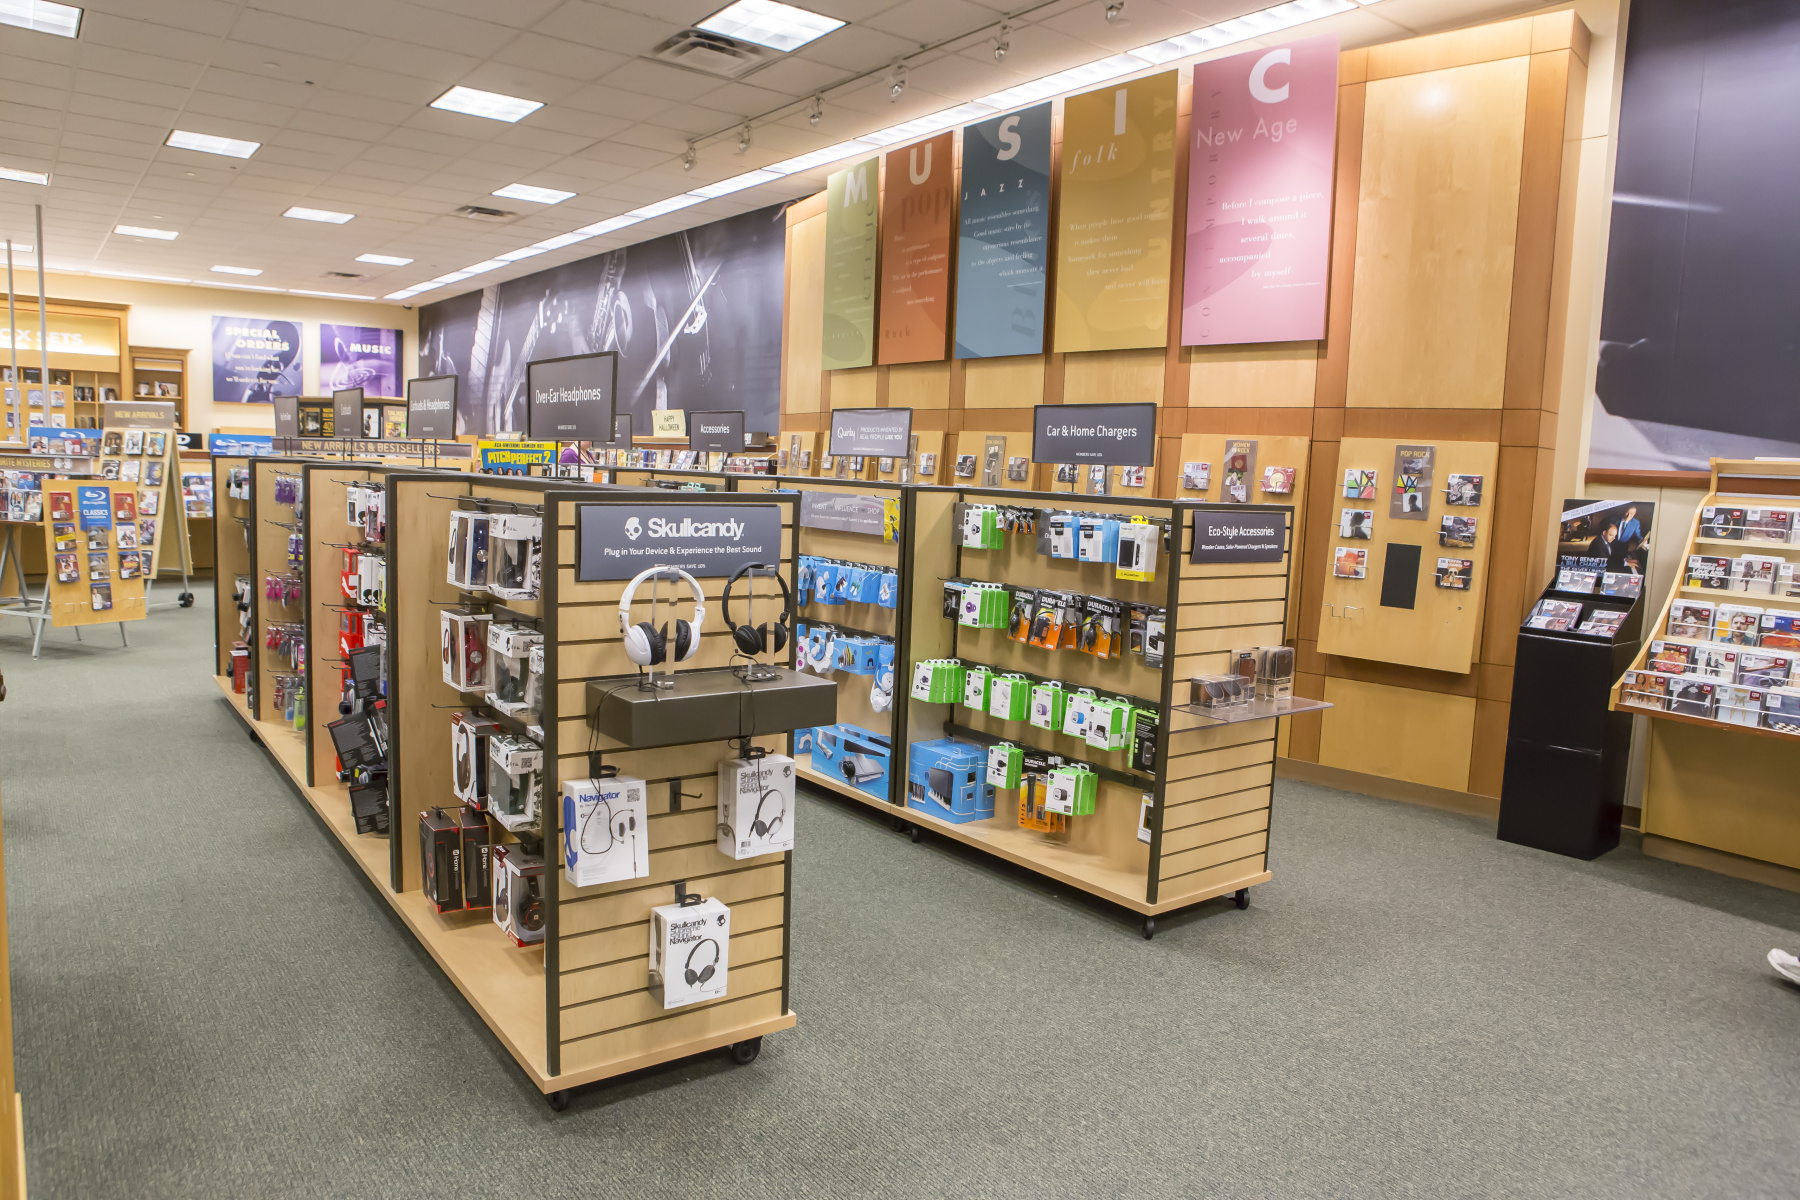 Nationwide Fixture Installations Inc Barnes & Noble Case Study New Store Installation Millwork Packages Retail Rollouts Program Management Signage Maintenance Custom Installation Services